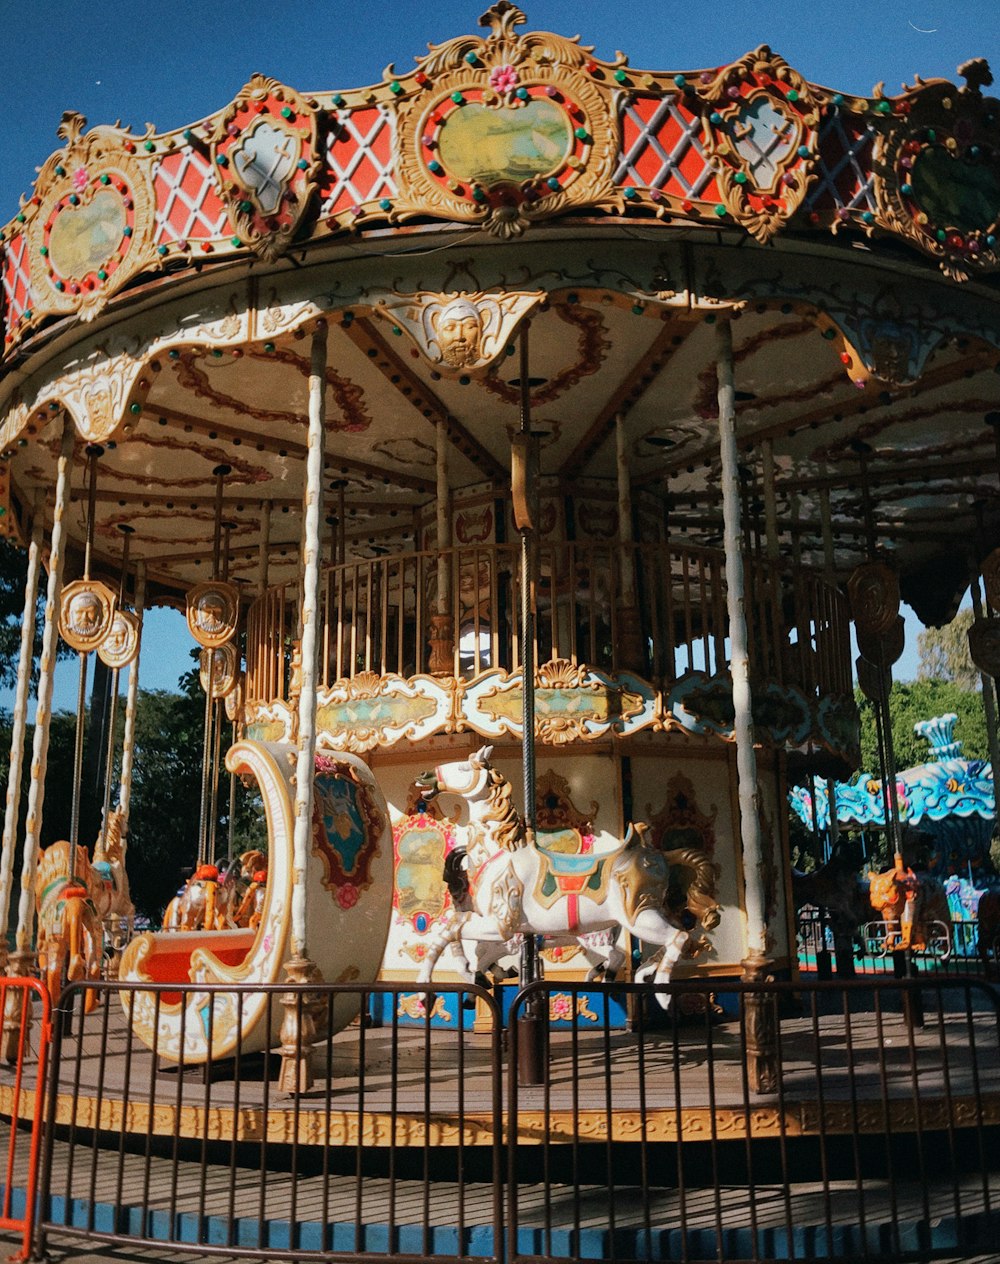 a merry go round at a carnival park